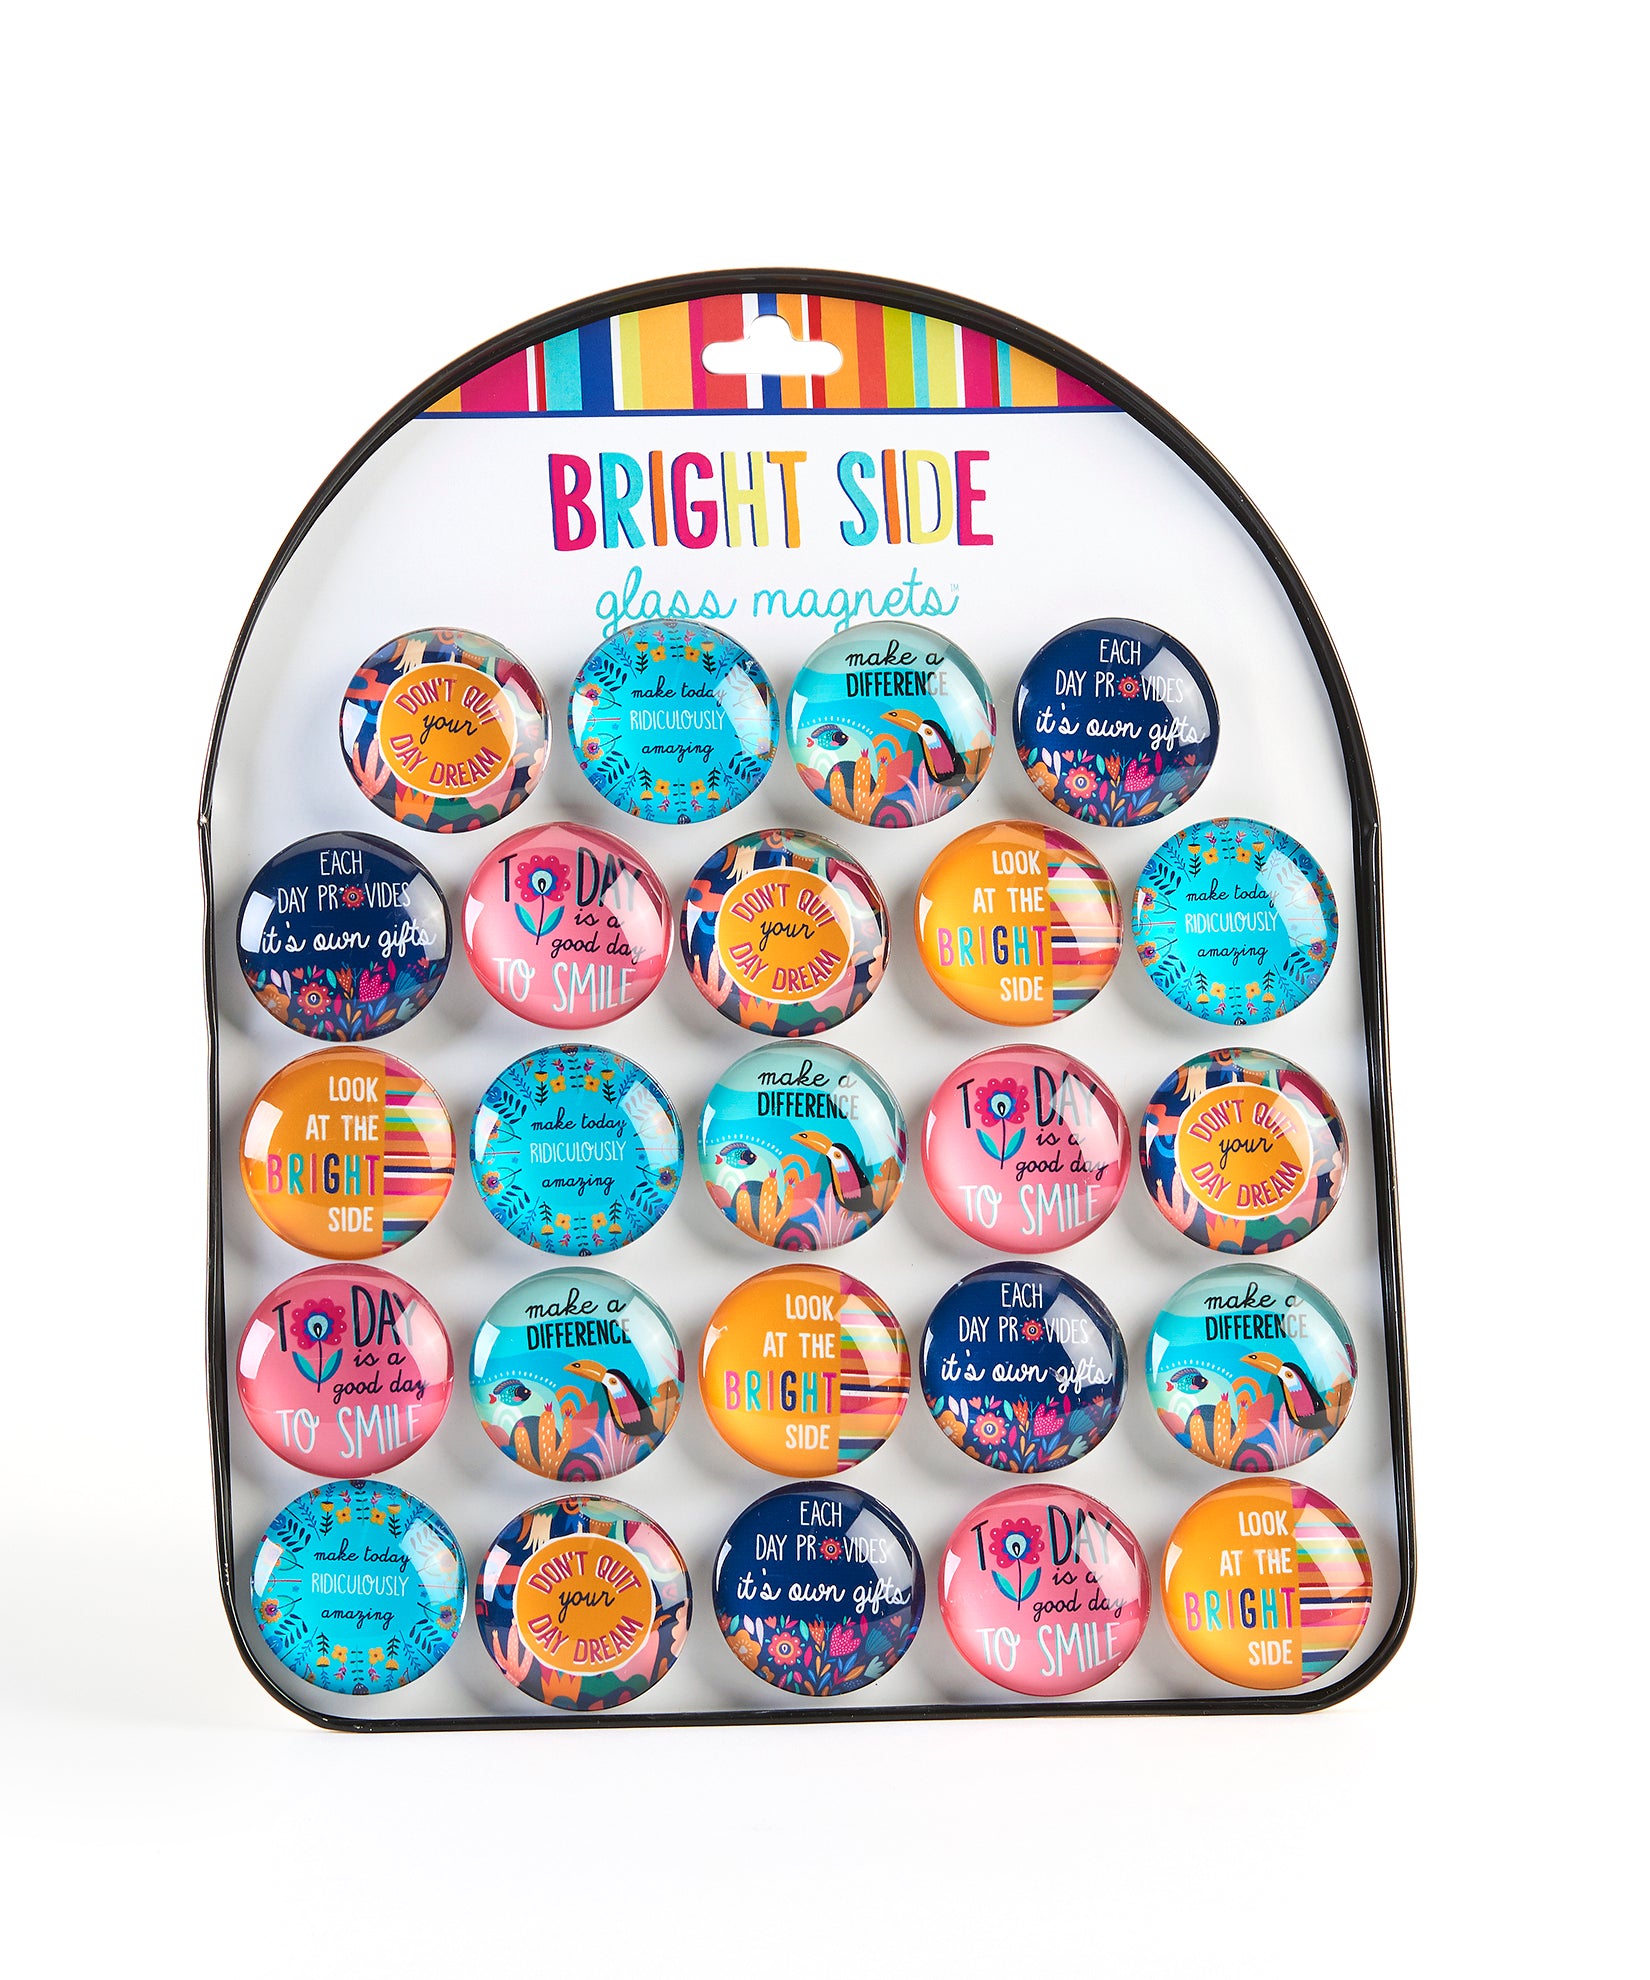 Bright Side Gift Tin - Our Love Story Tin 10th Anniversary gifts | eBay